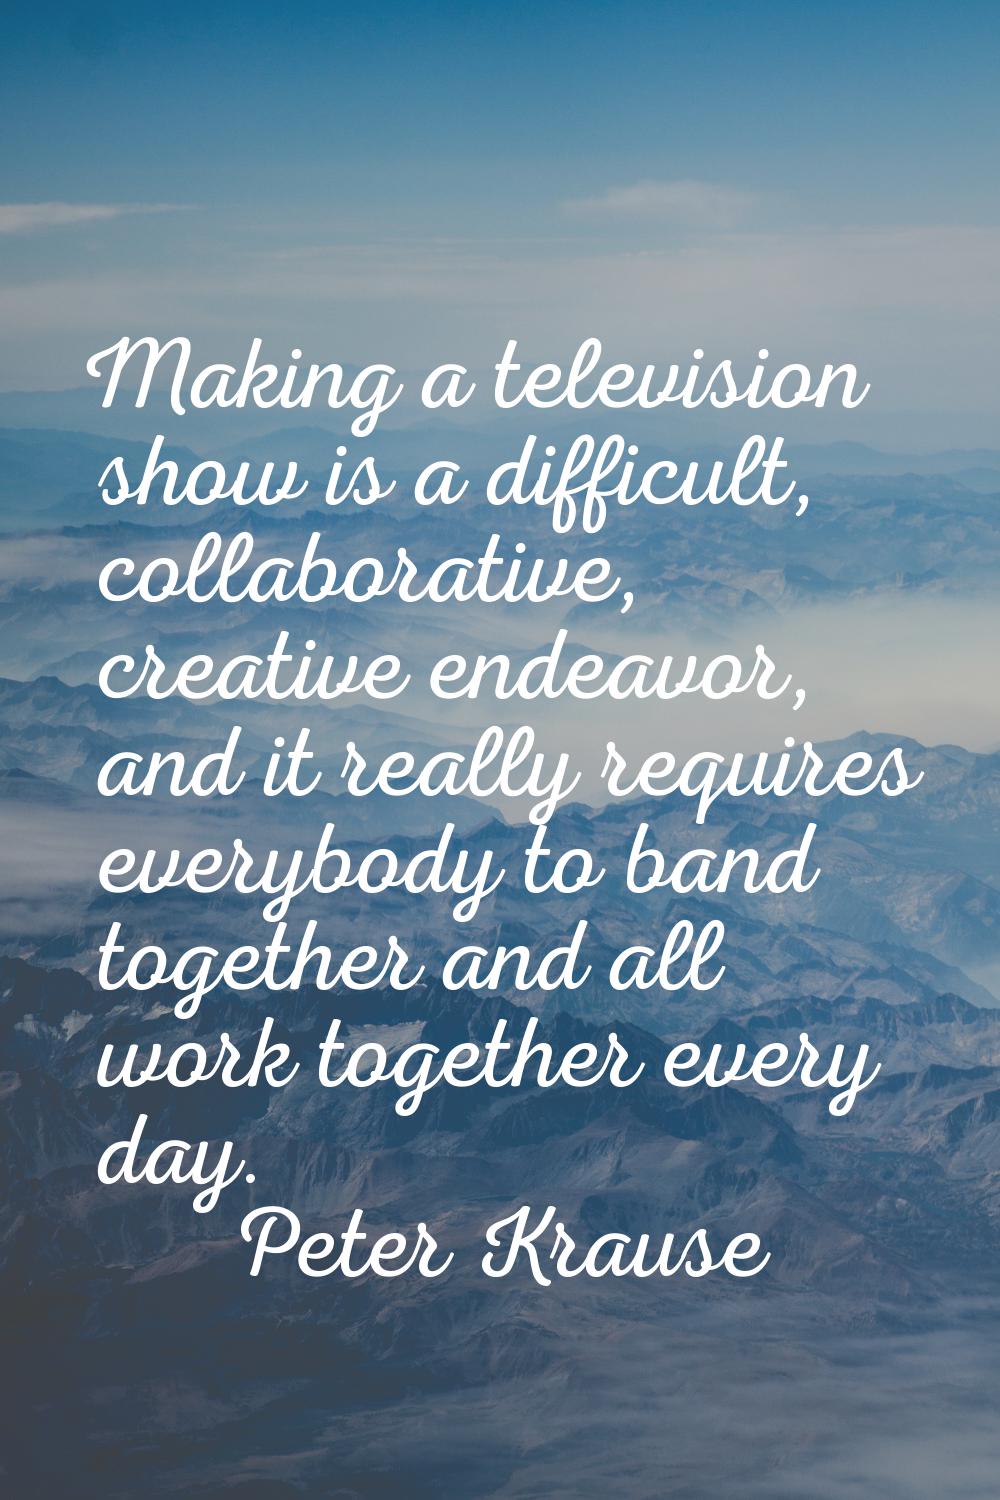 Making a television show is a difficult, collaborative, creative endeavor, and it really requires e